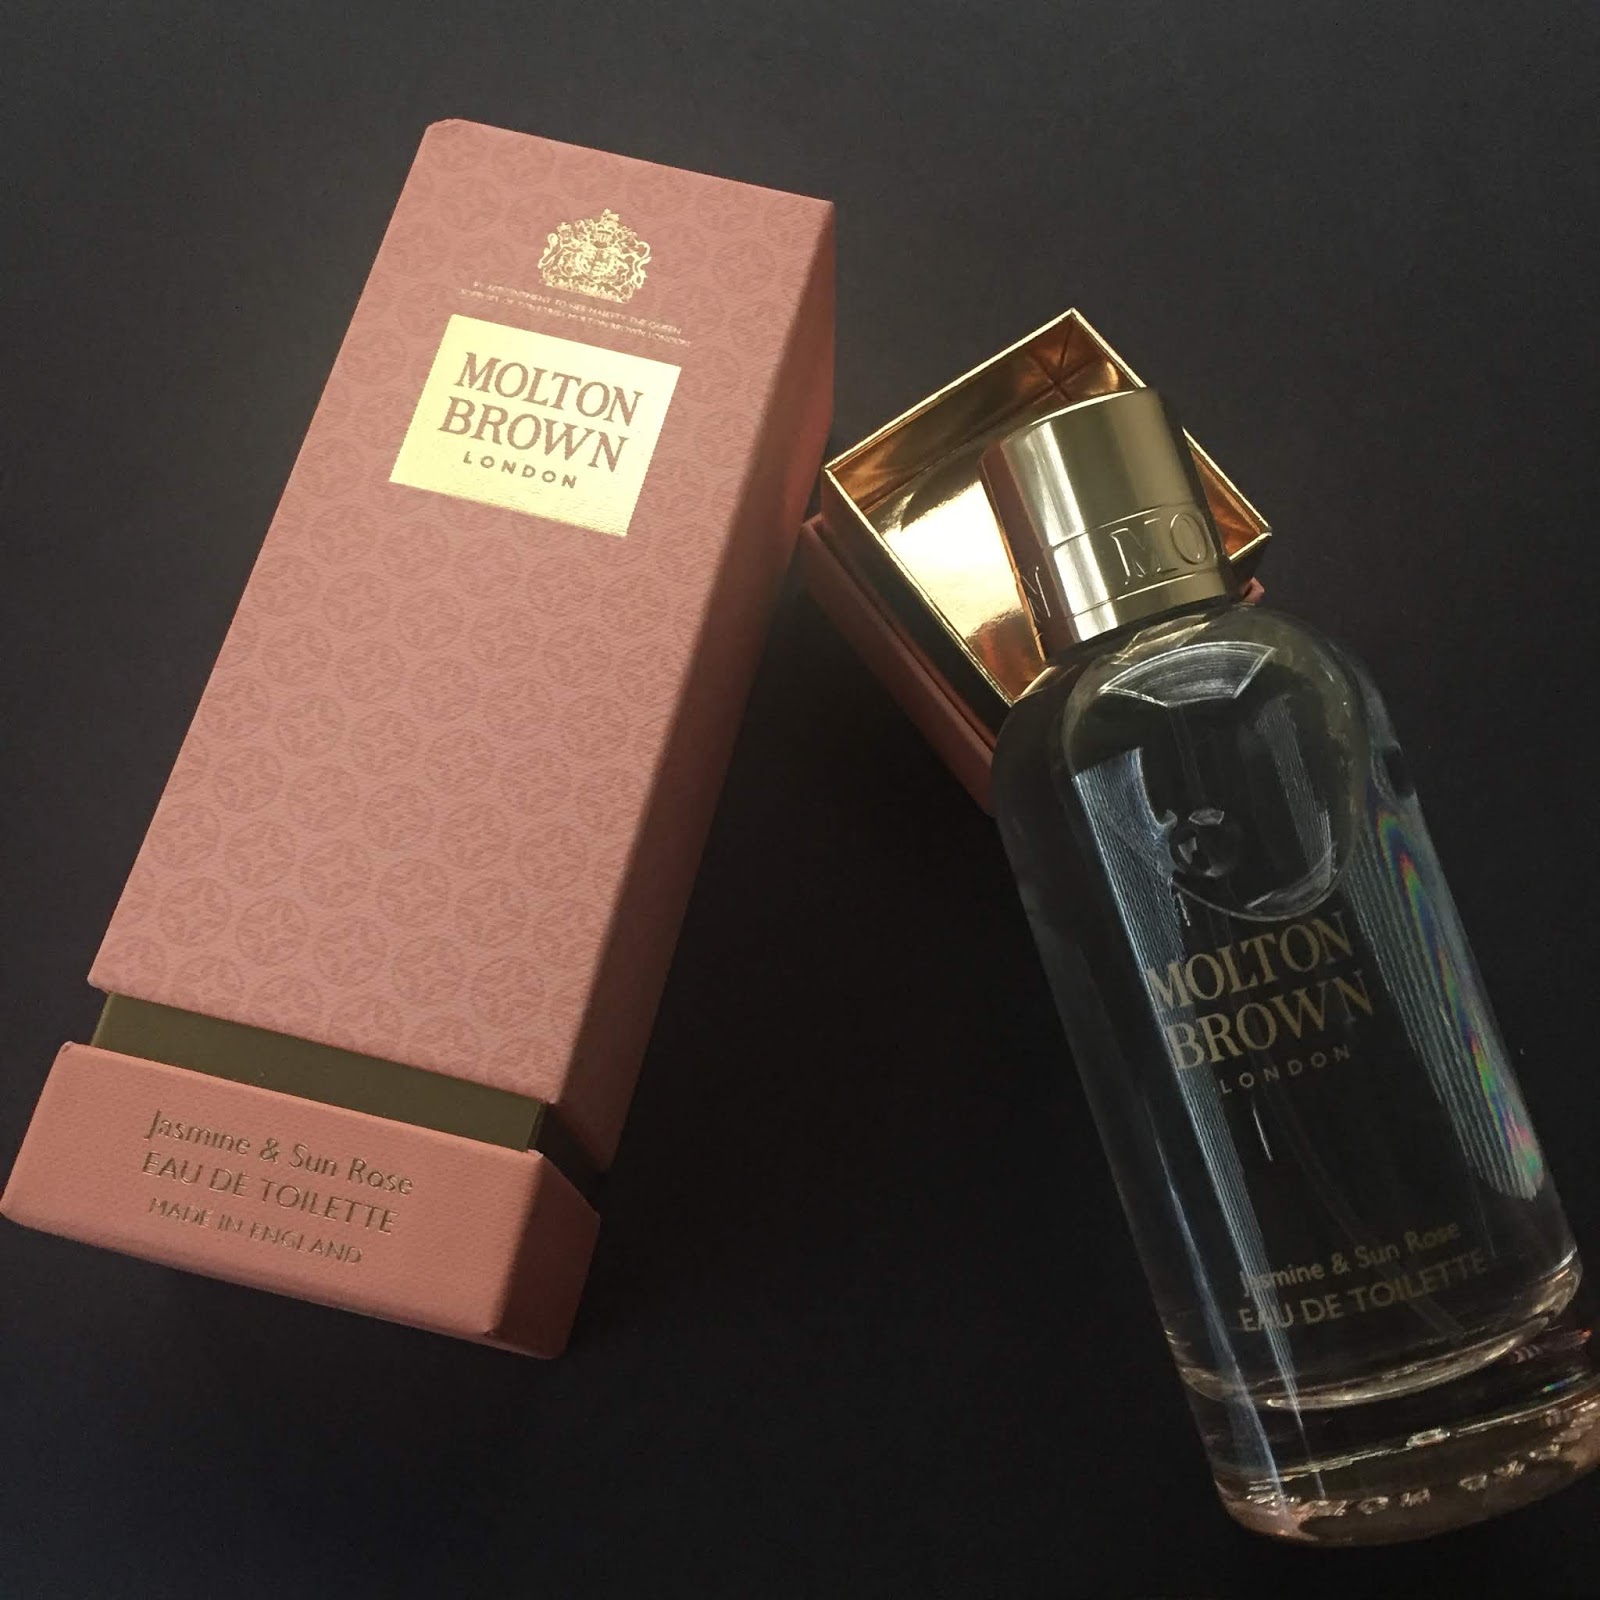 Molton Brown Jasmine And Sun Rose Eau De Toilette Perfume Review And Giveaway A Very Sweet Blog 